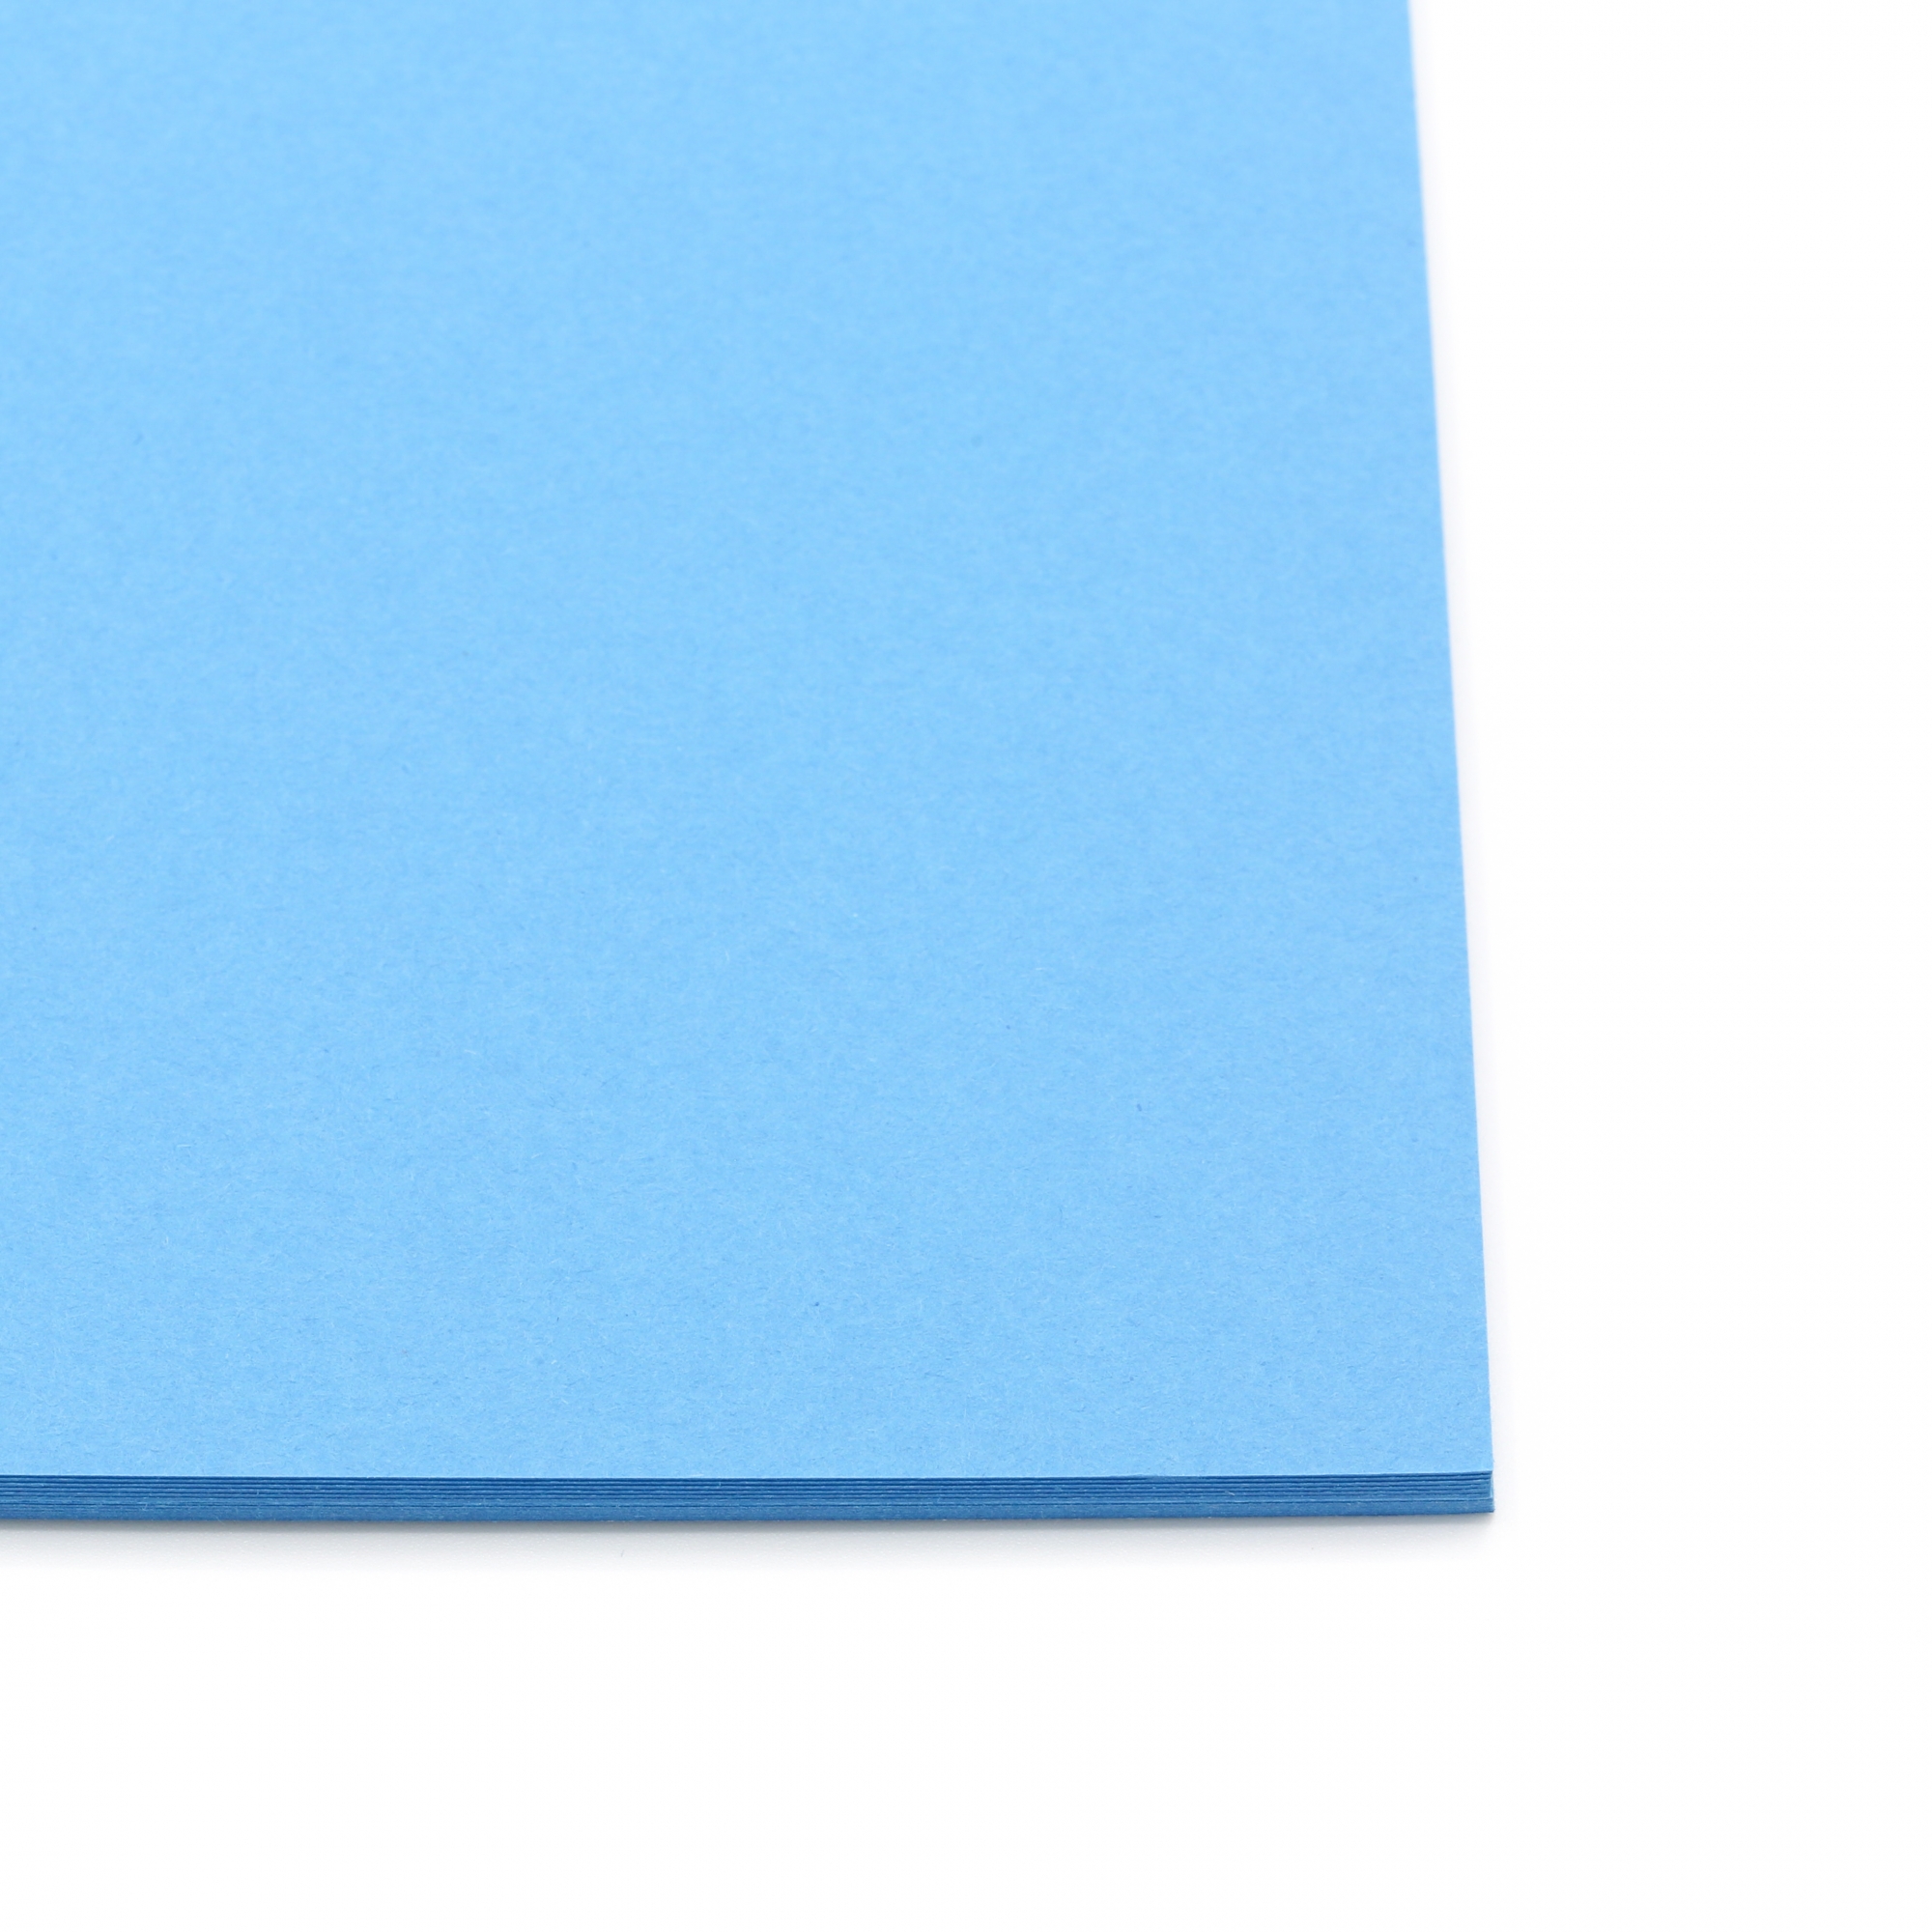 Colorplan Tabriz Blue 19x25 130lb cover 25pk, Paper, Envelopes, Cardstock  & Wide format, Quick shipping nationwide